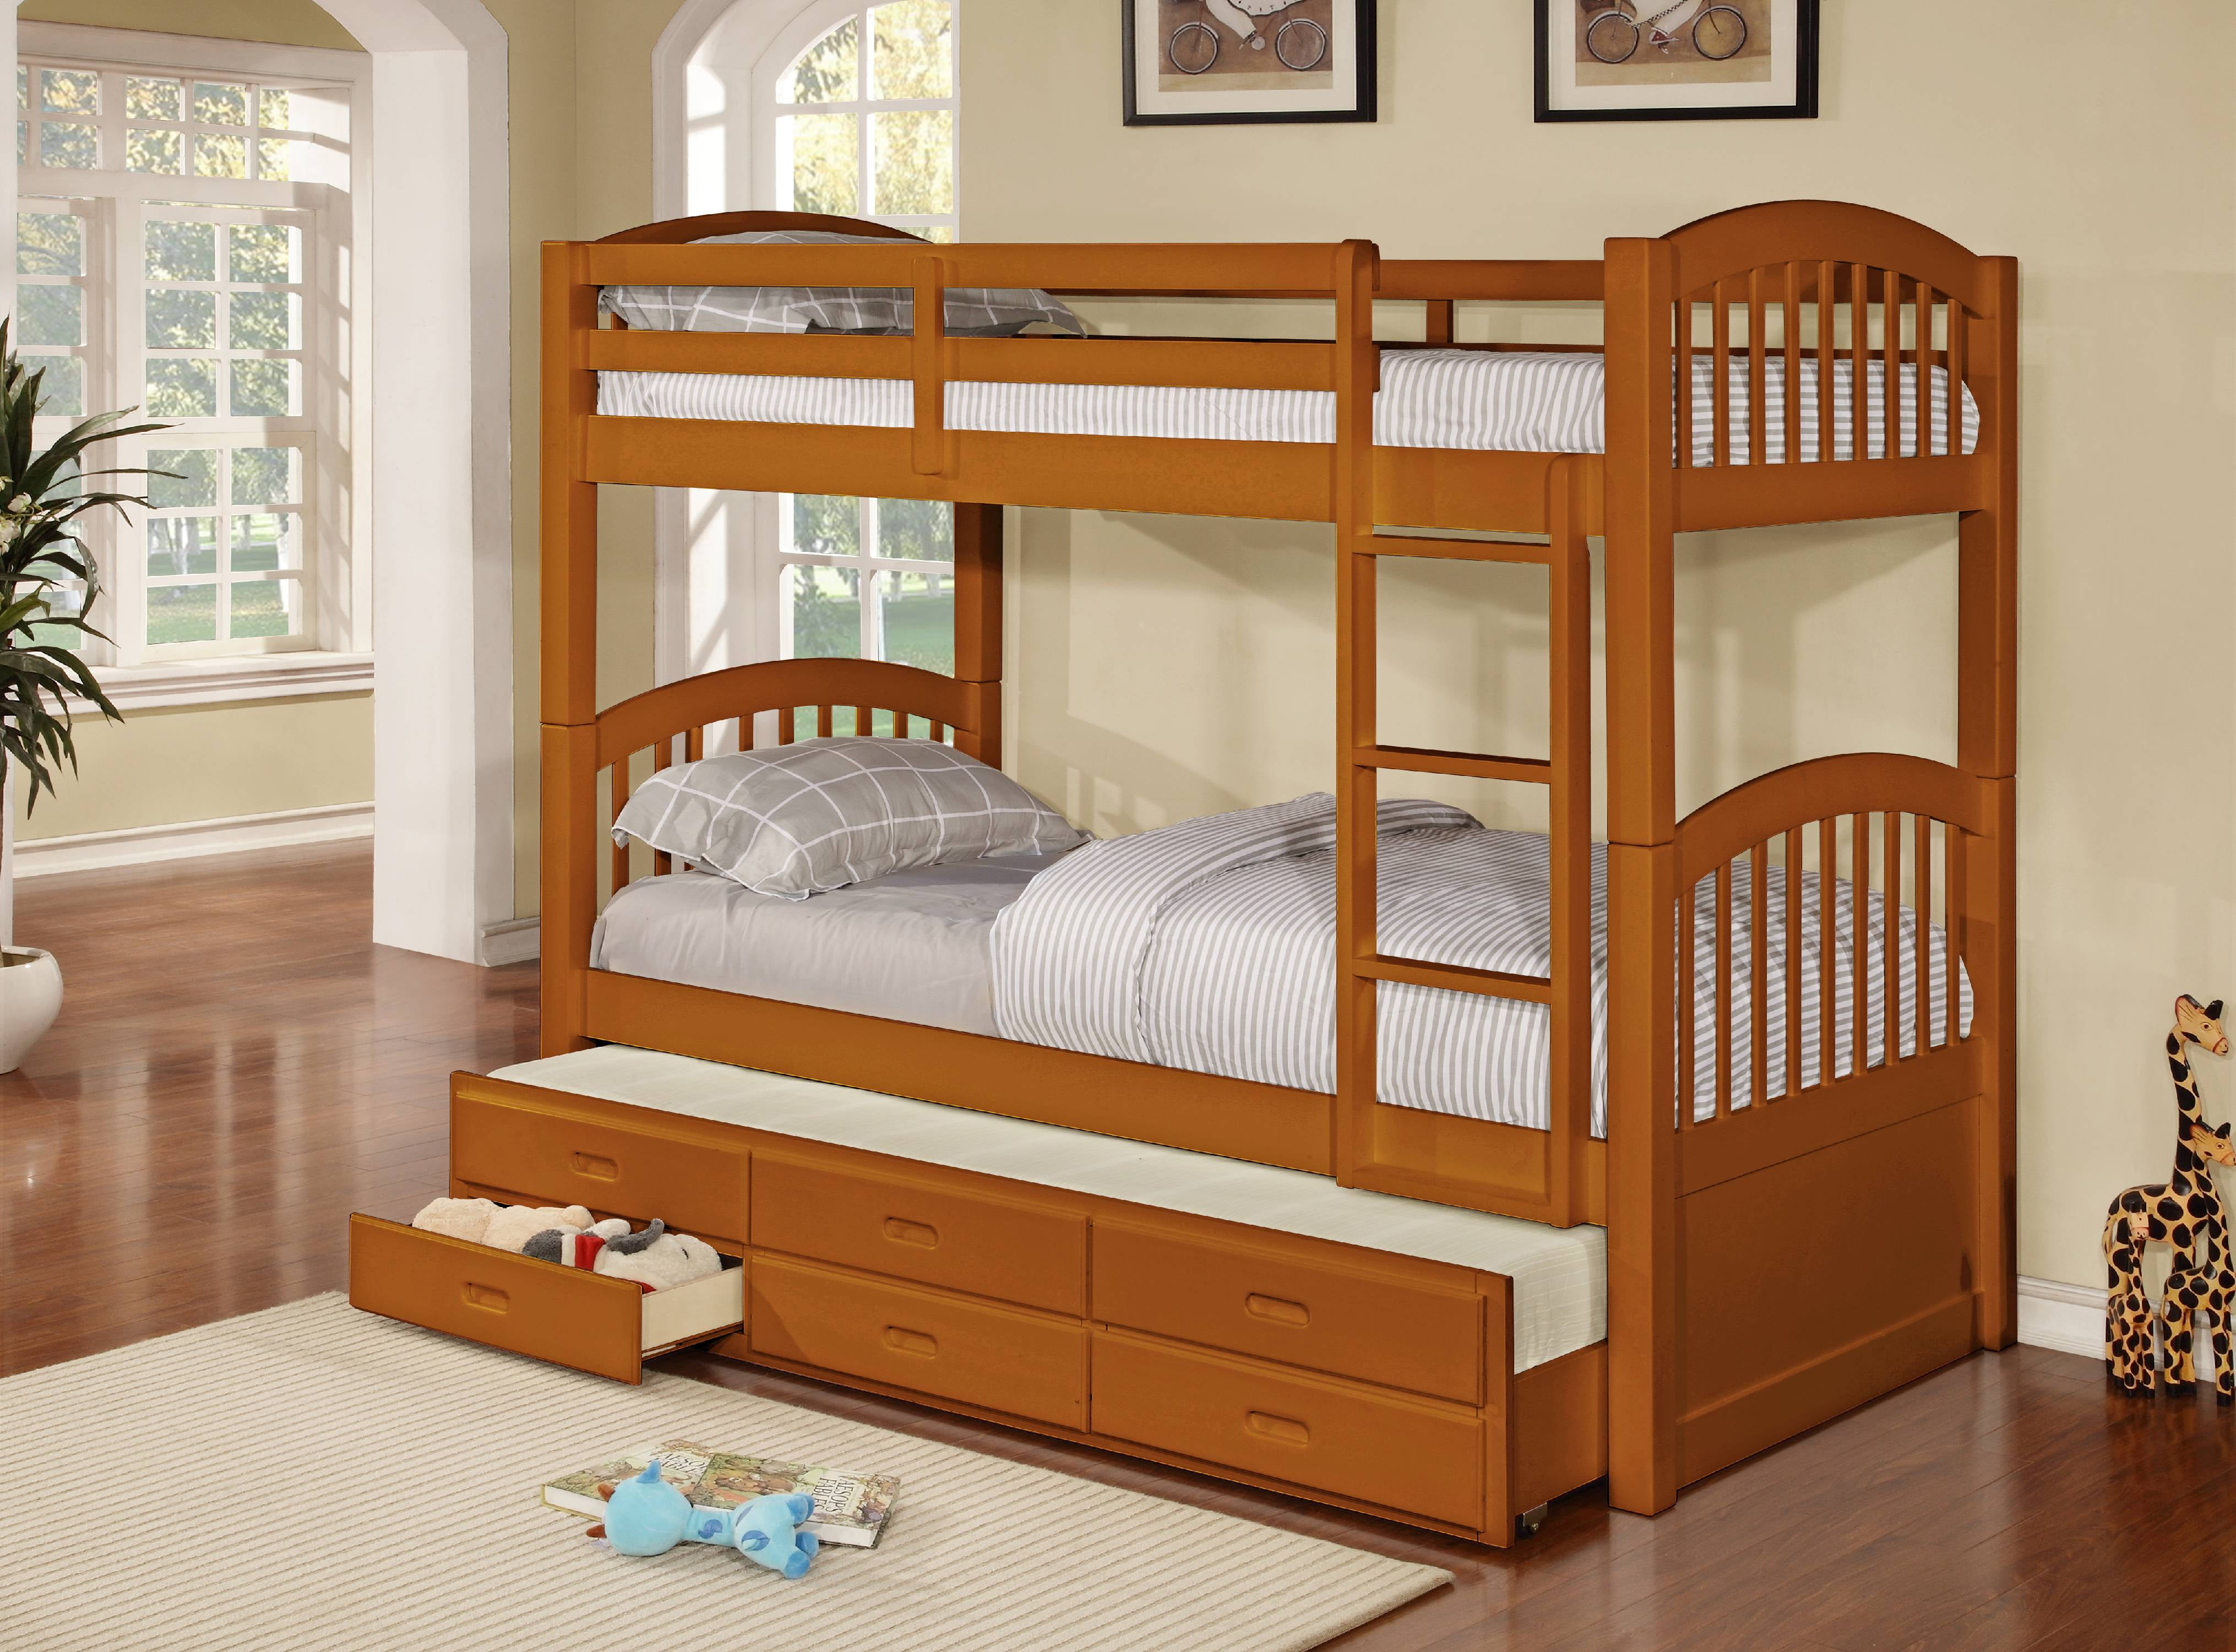 twin size mattresses for bunk beds